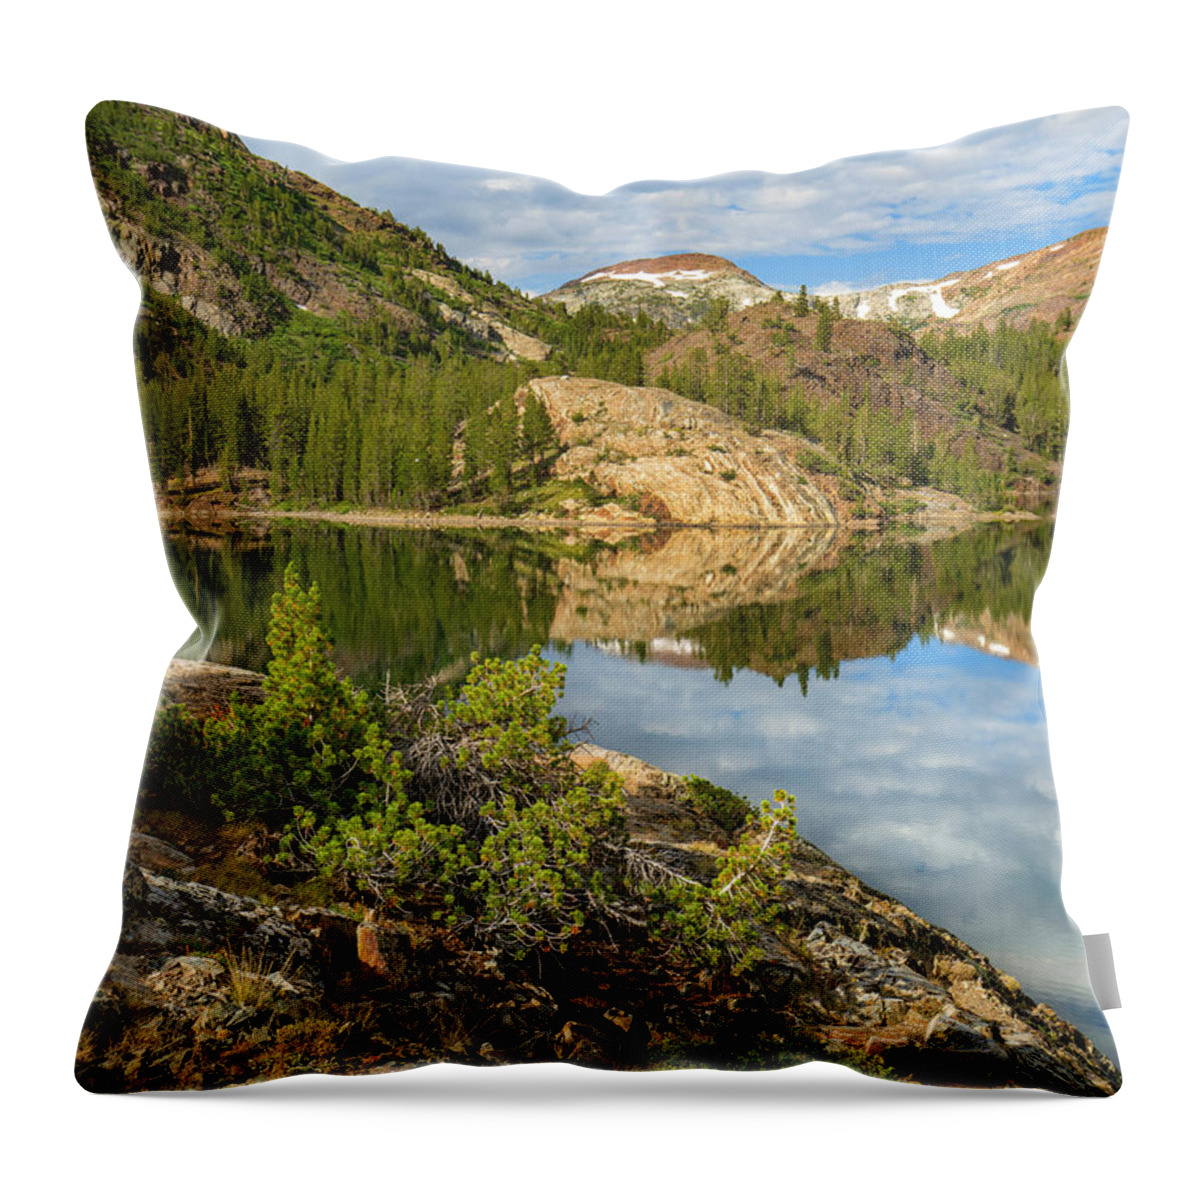 00574882 Throw Pillow featuring the photograph Dana Plateau From Ellery Lake, Sierra Nevada, Inyo National Forest, California #1 by Tim Fitzharris